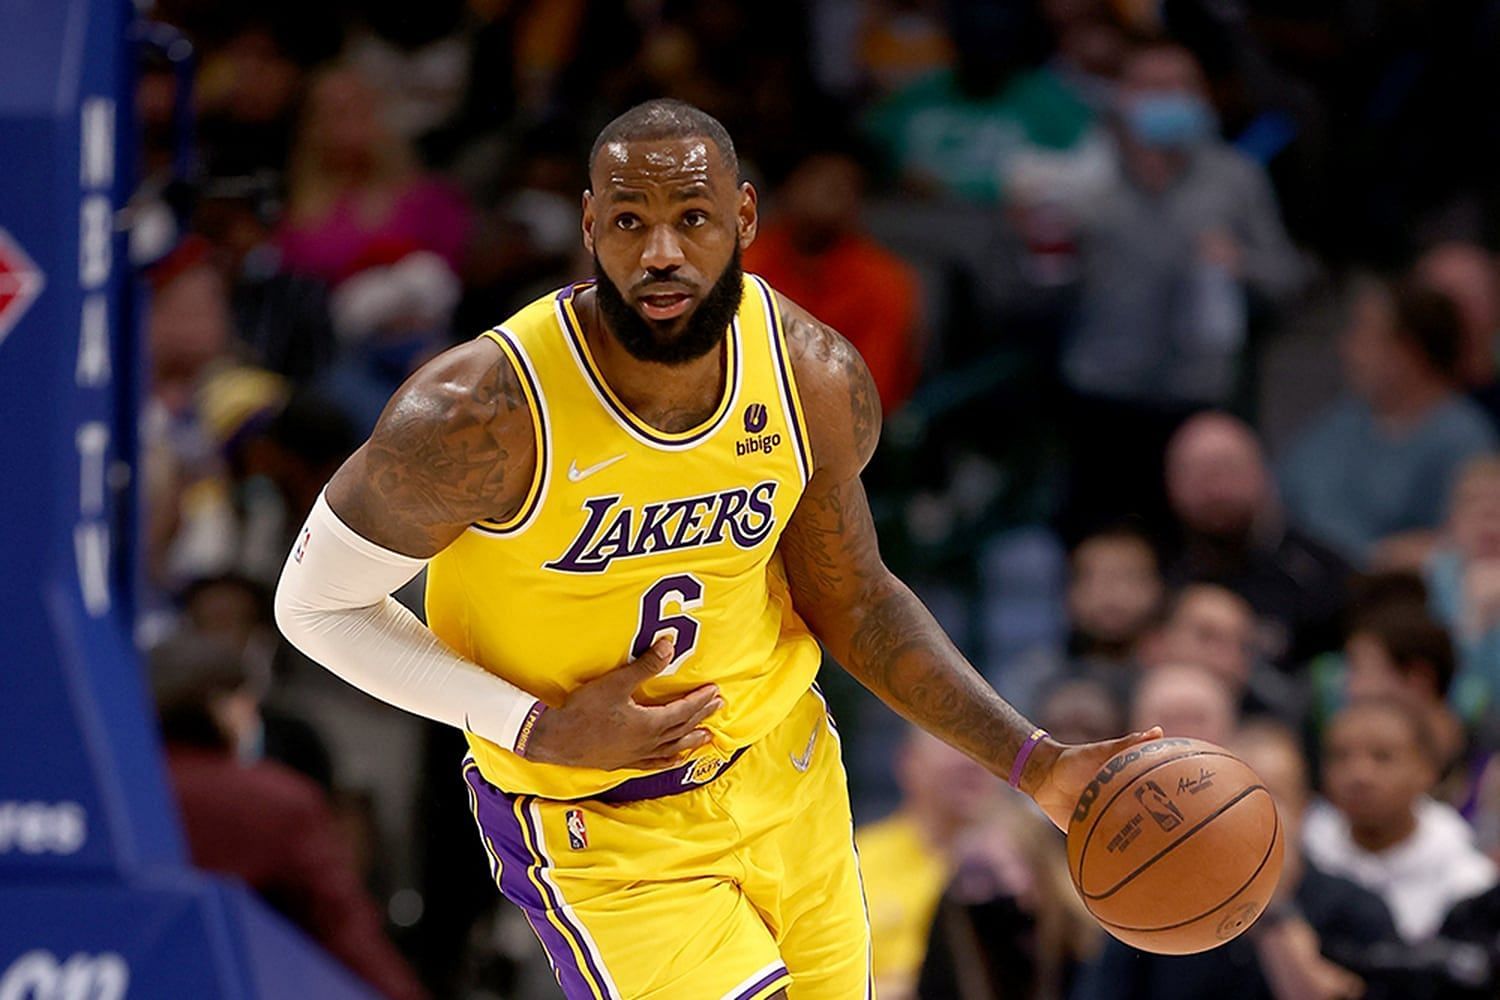 The entire NBA will be watching closely what happens on August 4 between LeBron James and the LA Lakers. [Photo: Chat Sports]